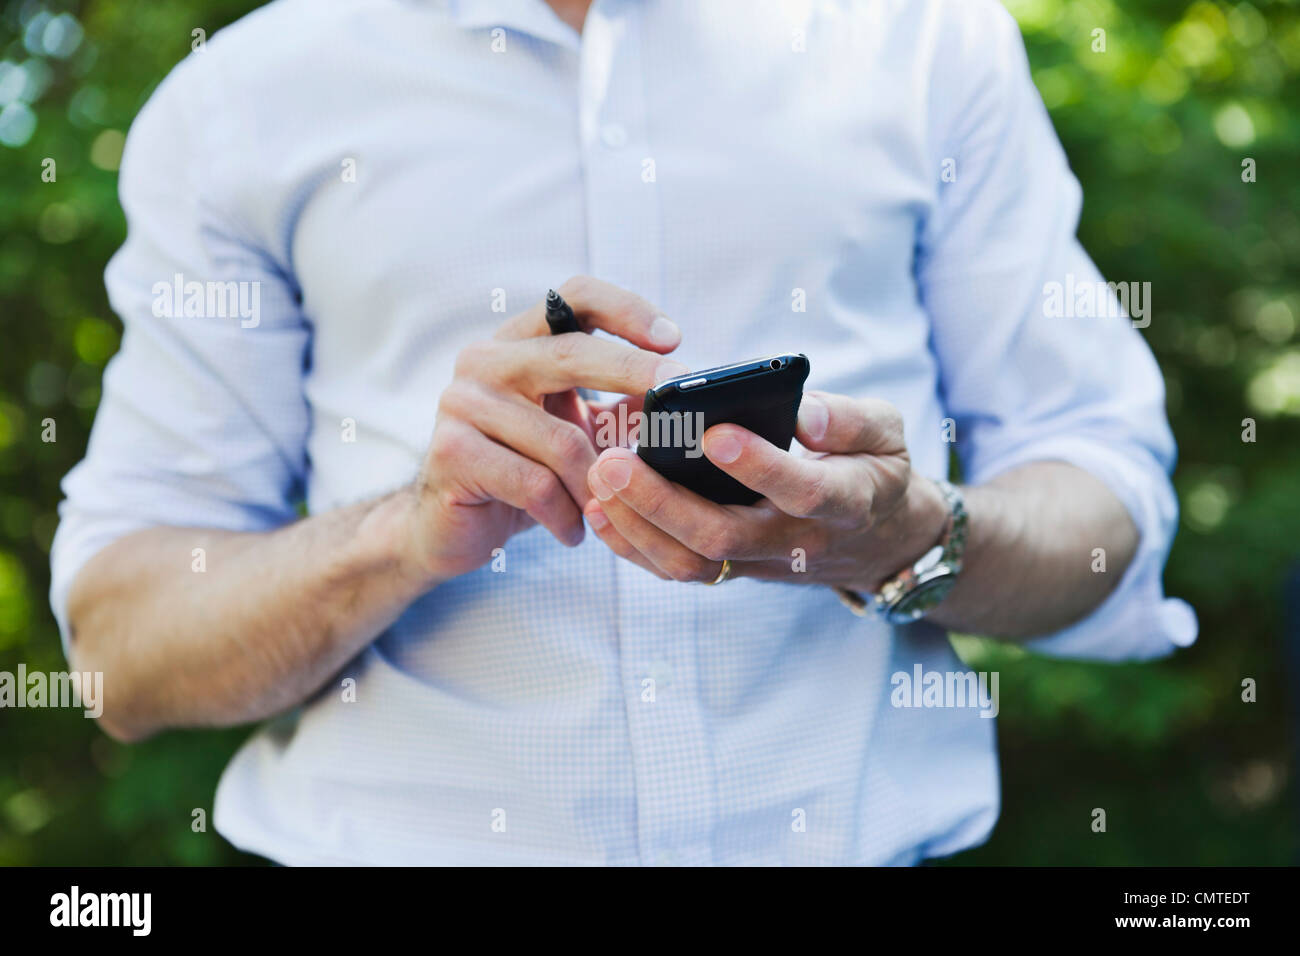 Midsection of man using cell phone Stock Photo